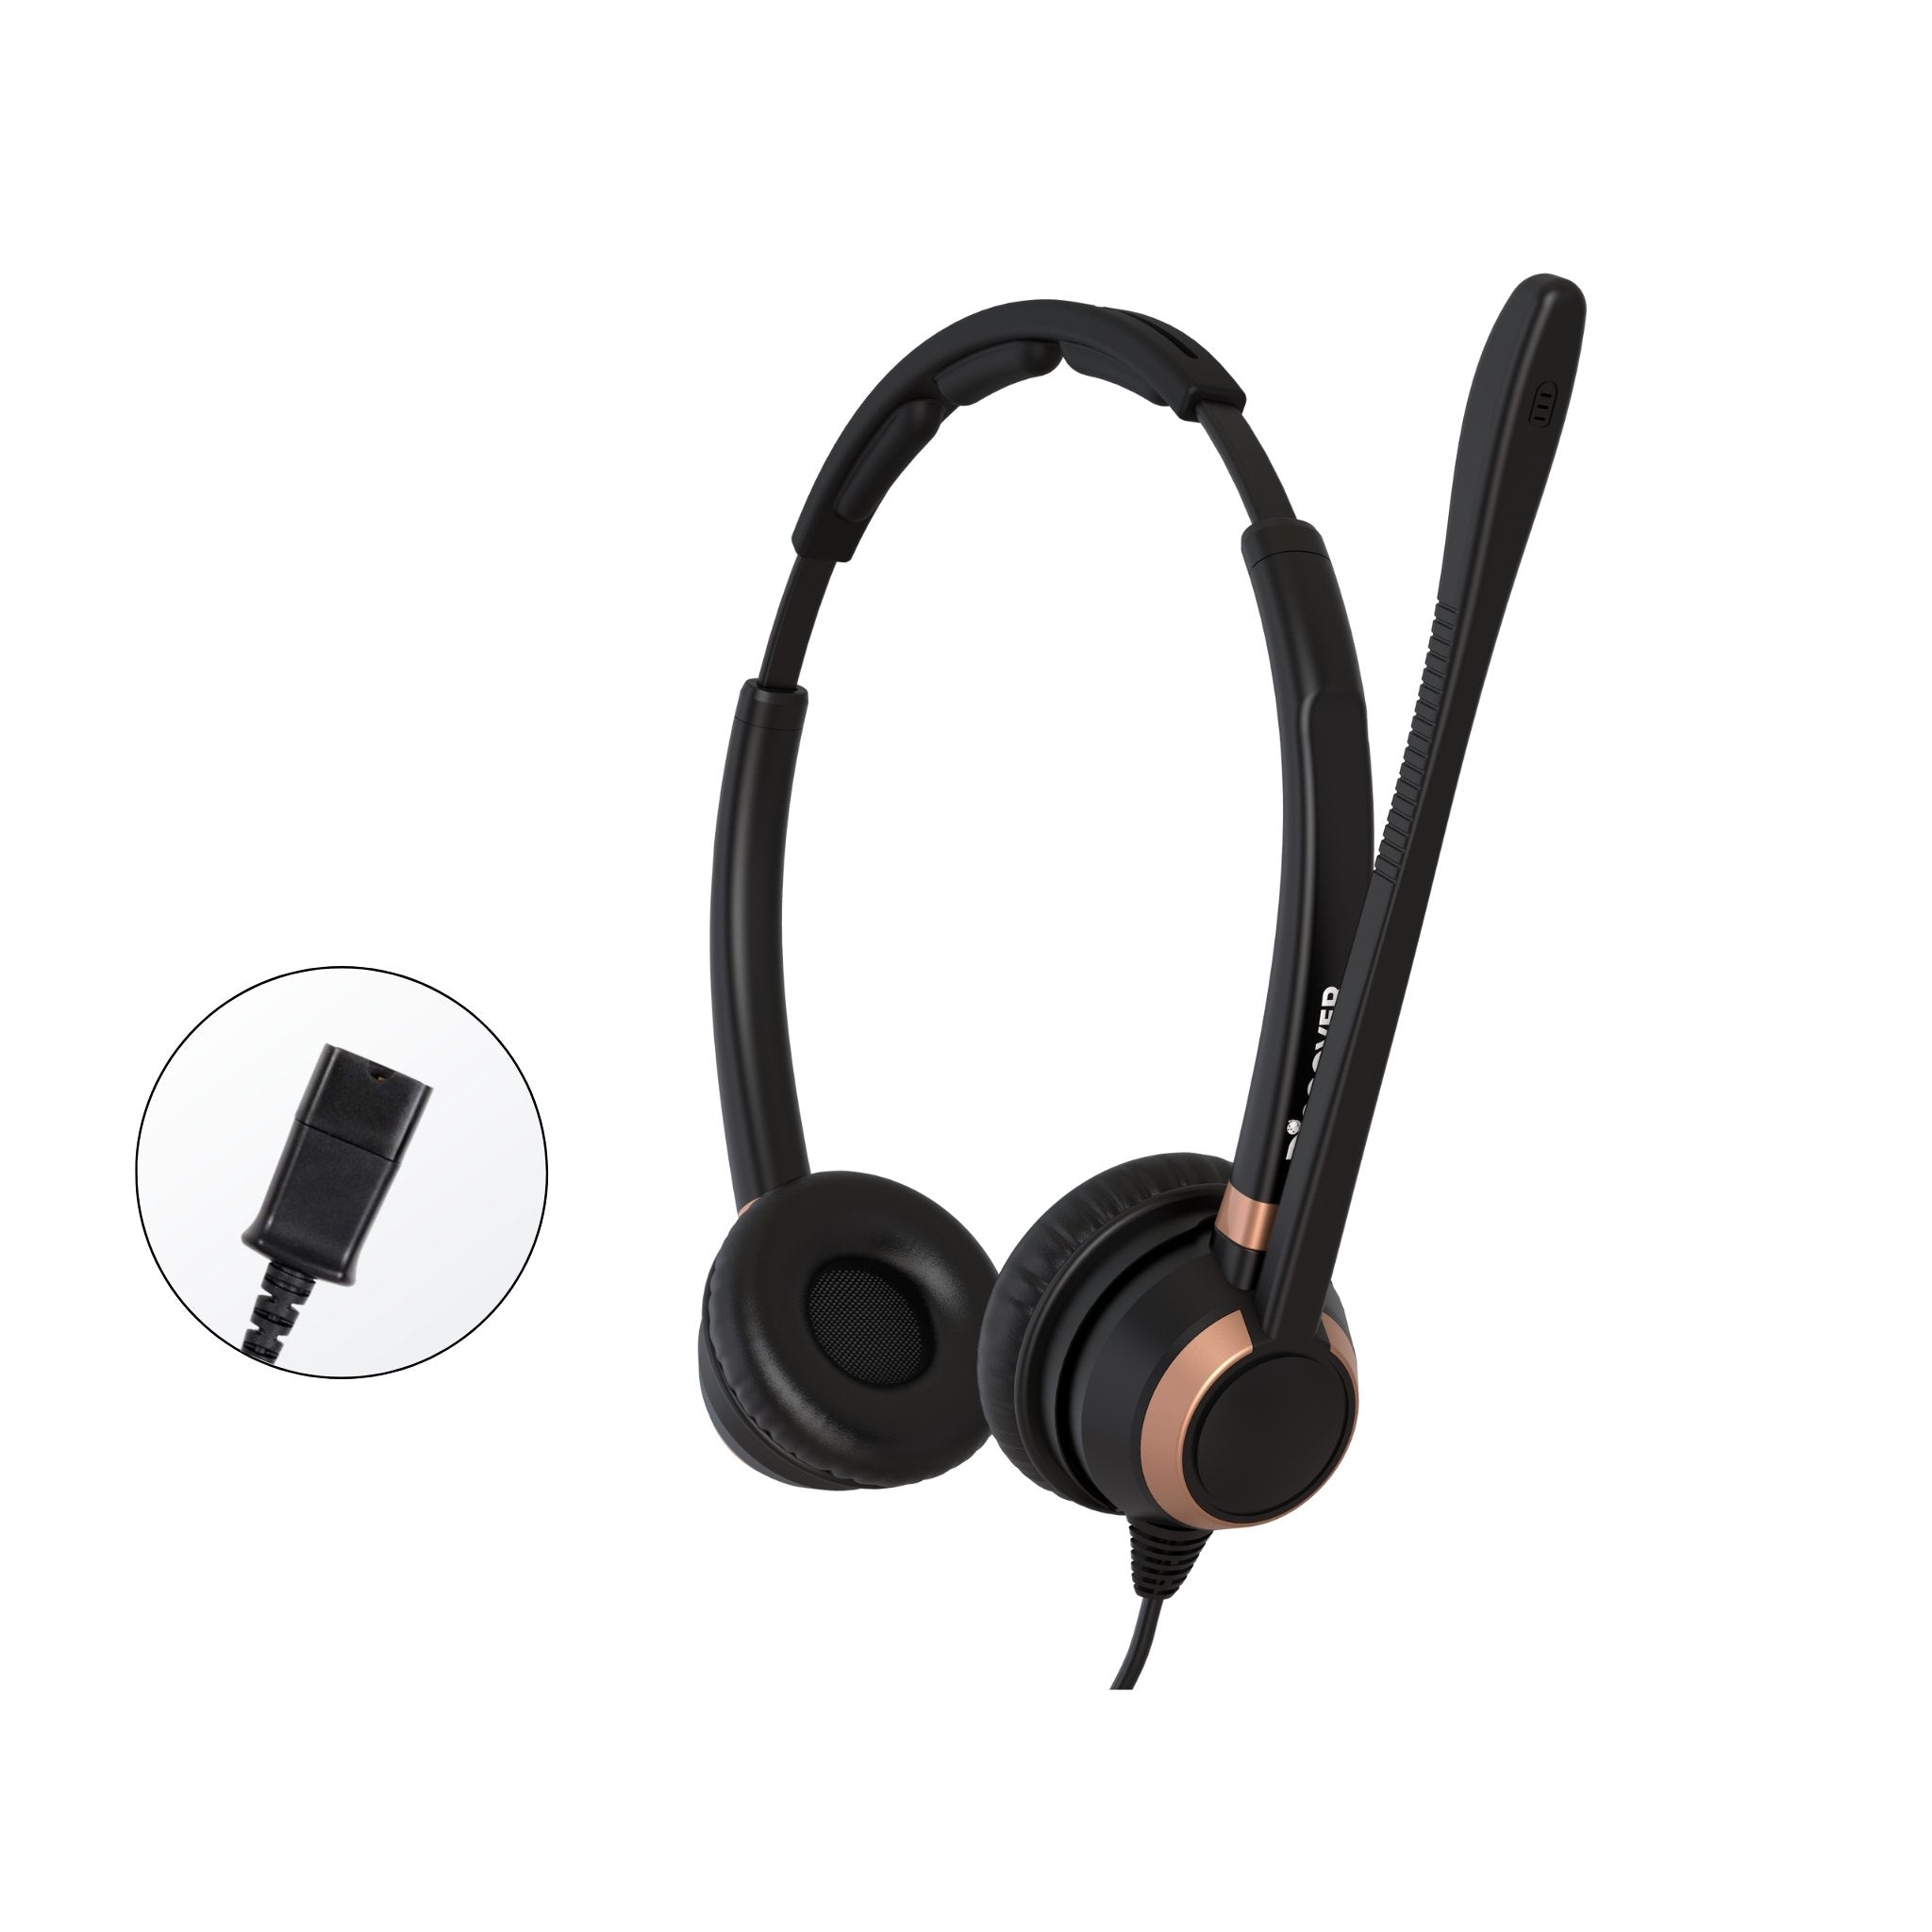 Discover D712 Dual Speaker Wired Office Headset for Professionals - Headset Advisor